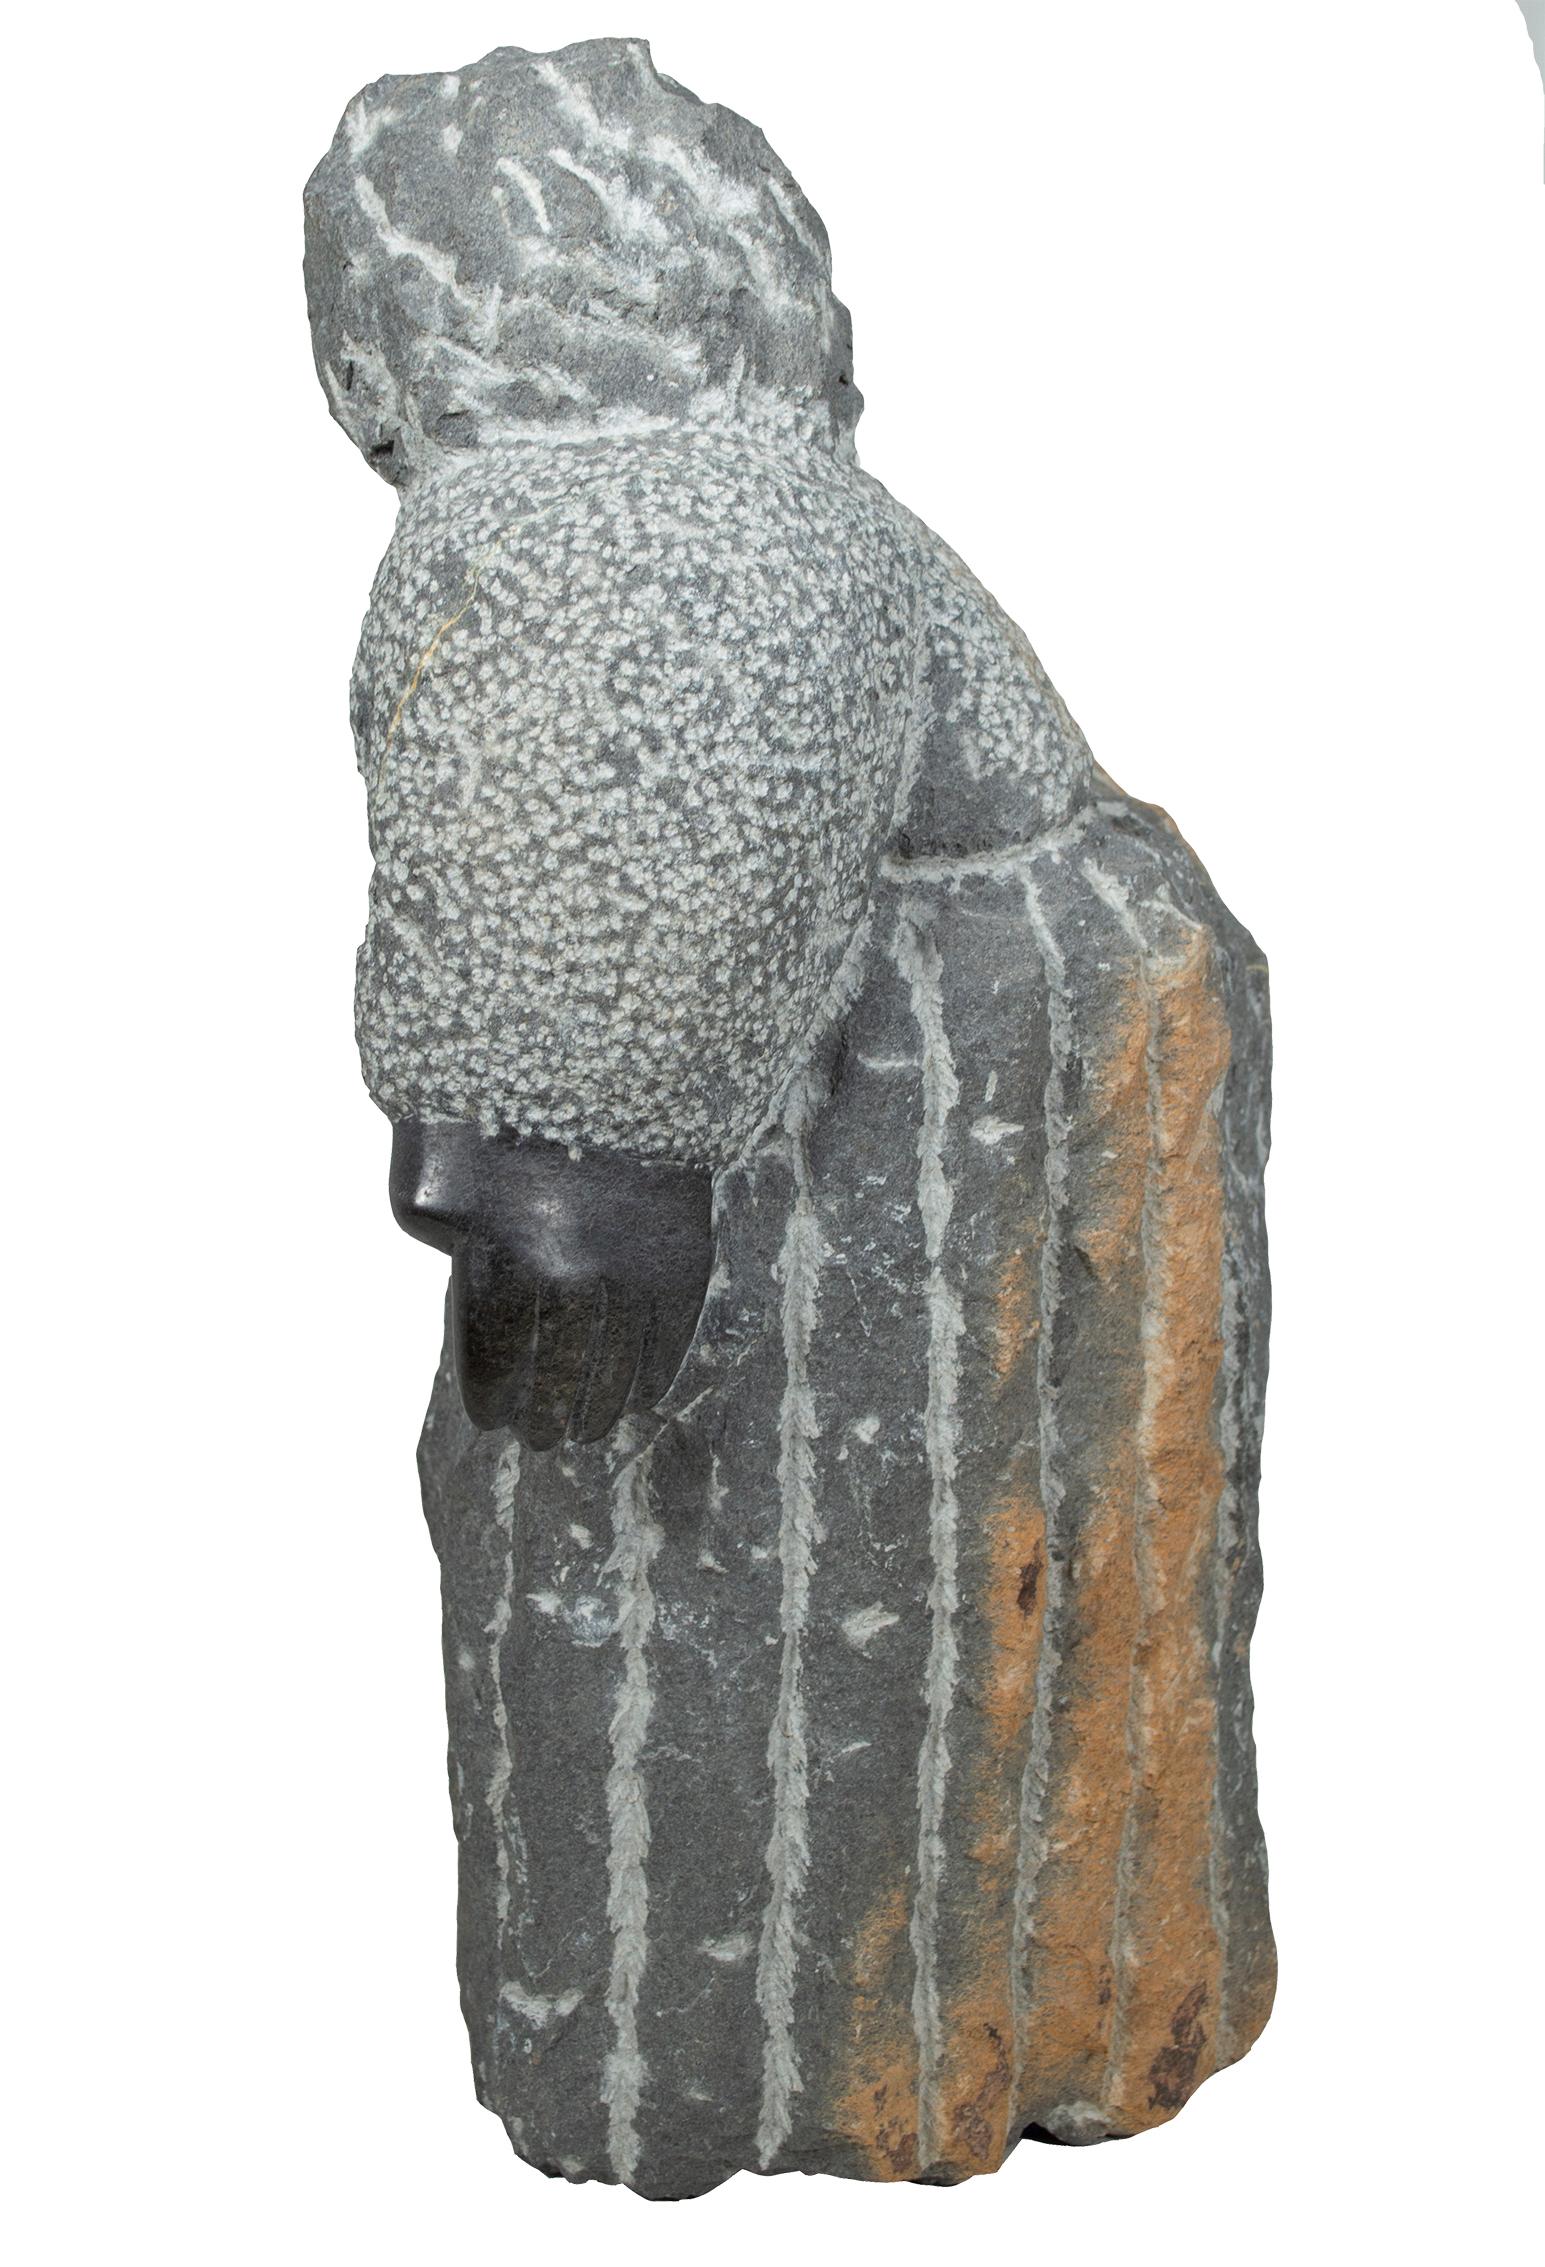 'Grandmother' is an original black serpentine sculpture by the celebrated second-generation Shona artist Colleen Madamombe. The sculpture presents a character common to Madamombe's work, a woman with a round face and wearing a billowing dress.